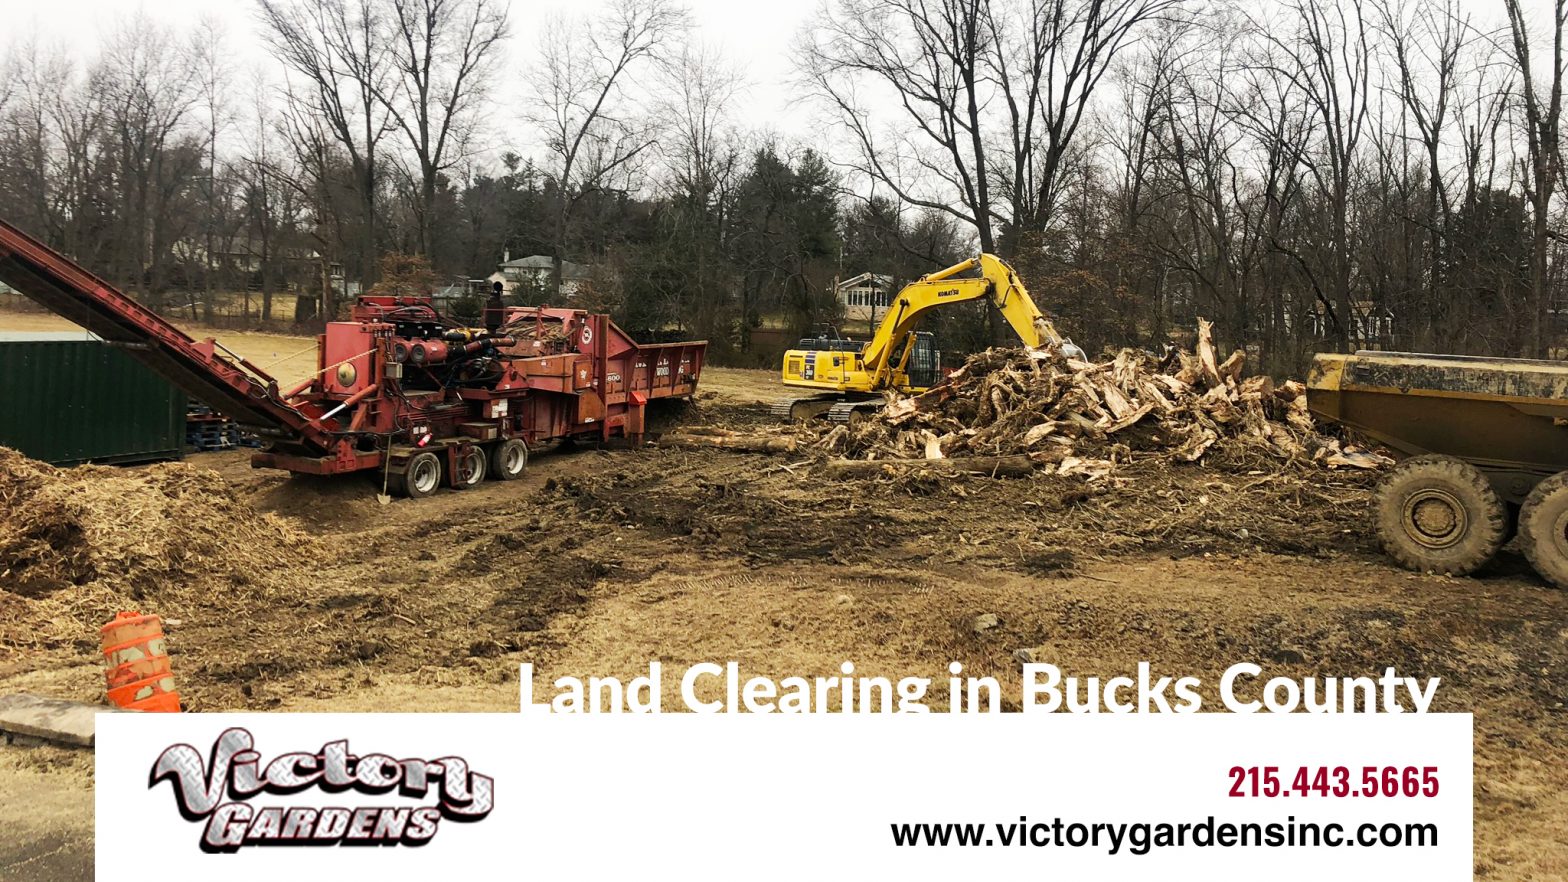 Land Clearing in Bucks County